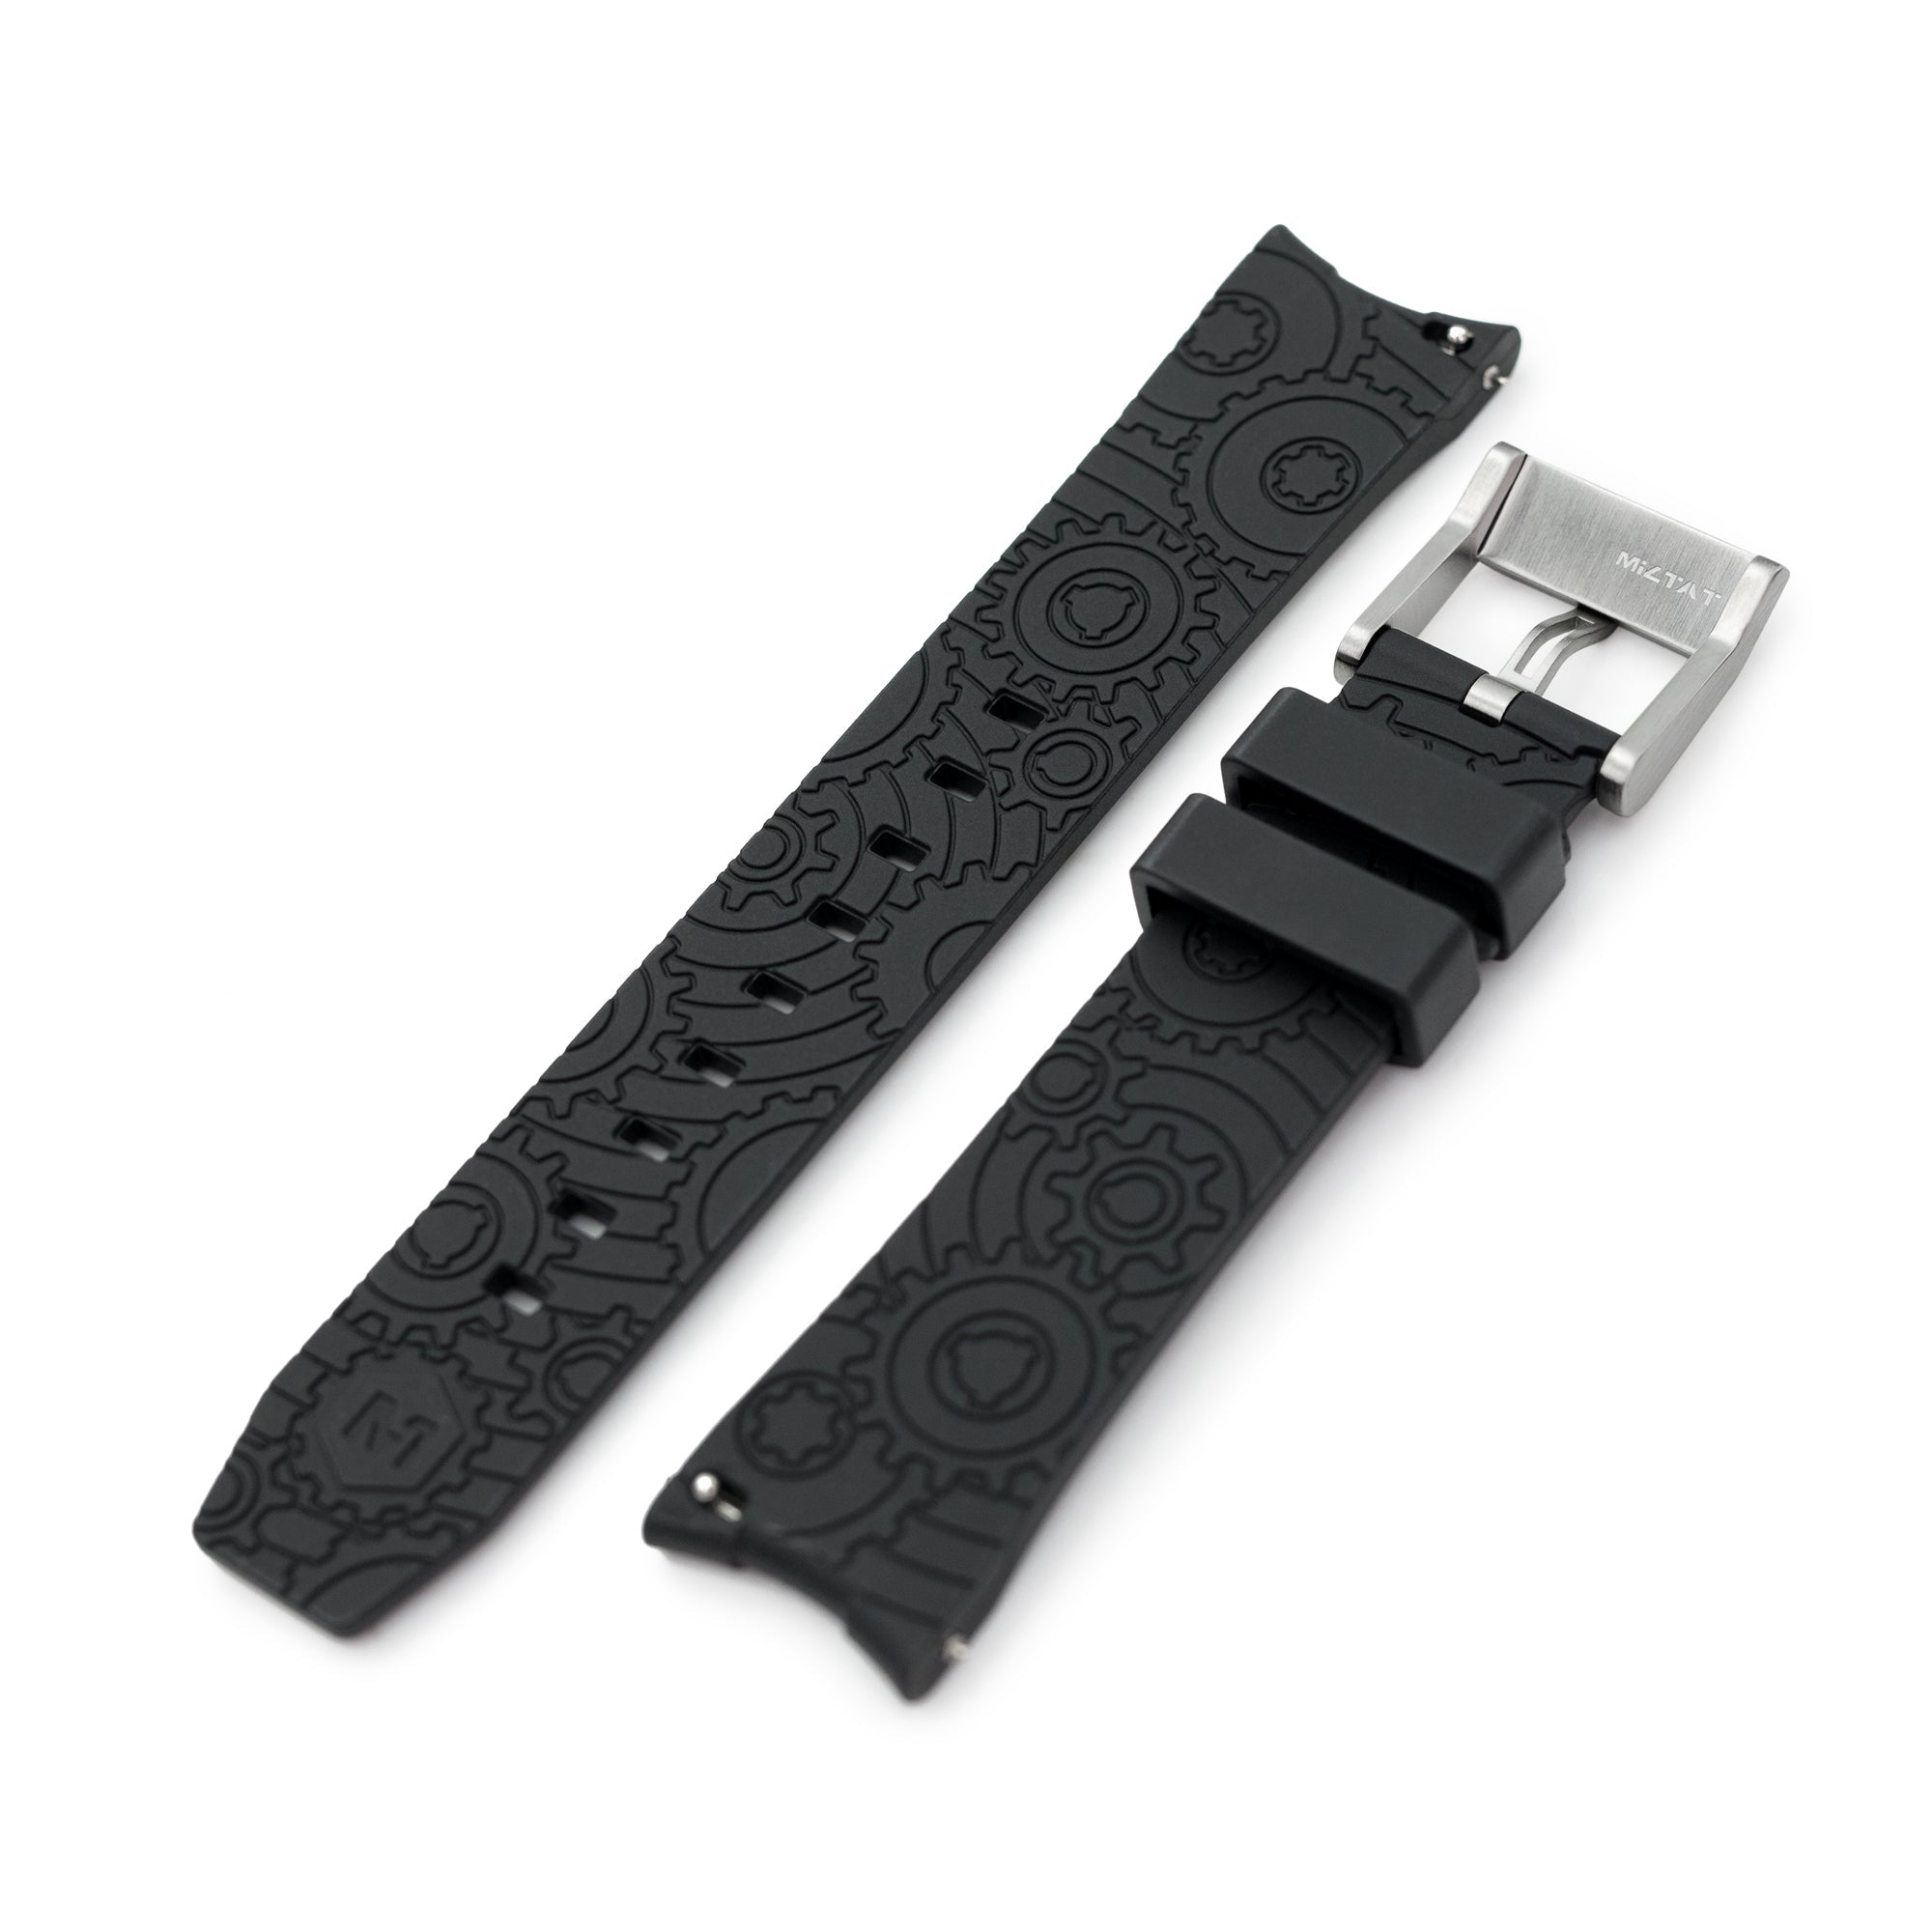 20mm Wheels Resilient Curved End FKM Rubber watch strap, Black Strapcode watch bands